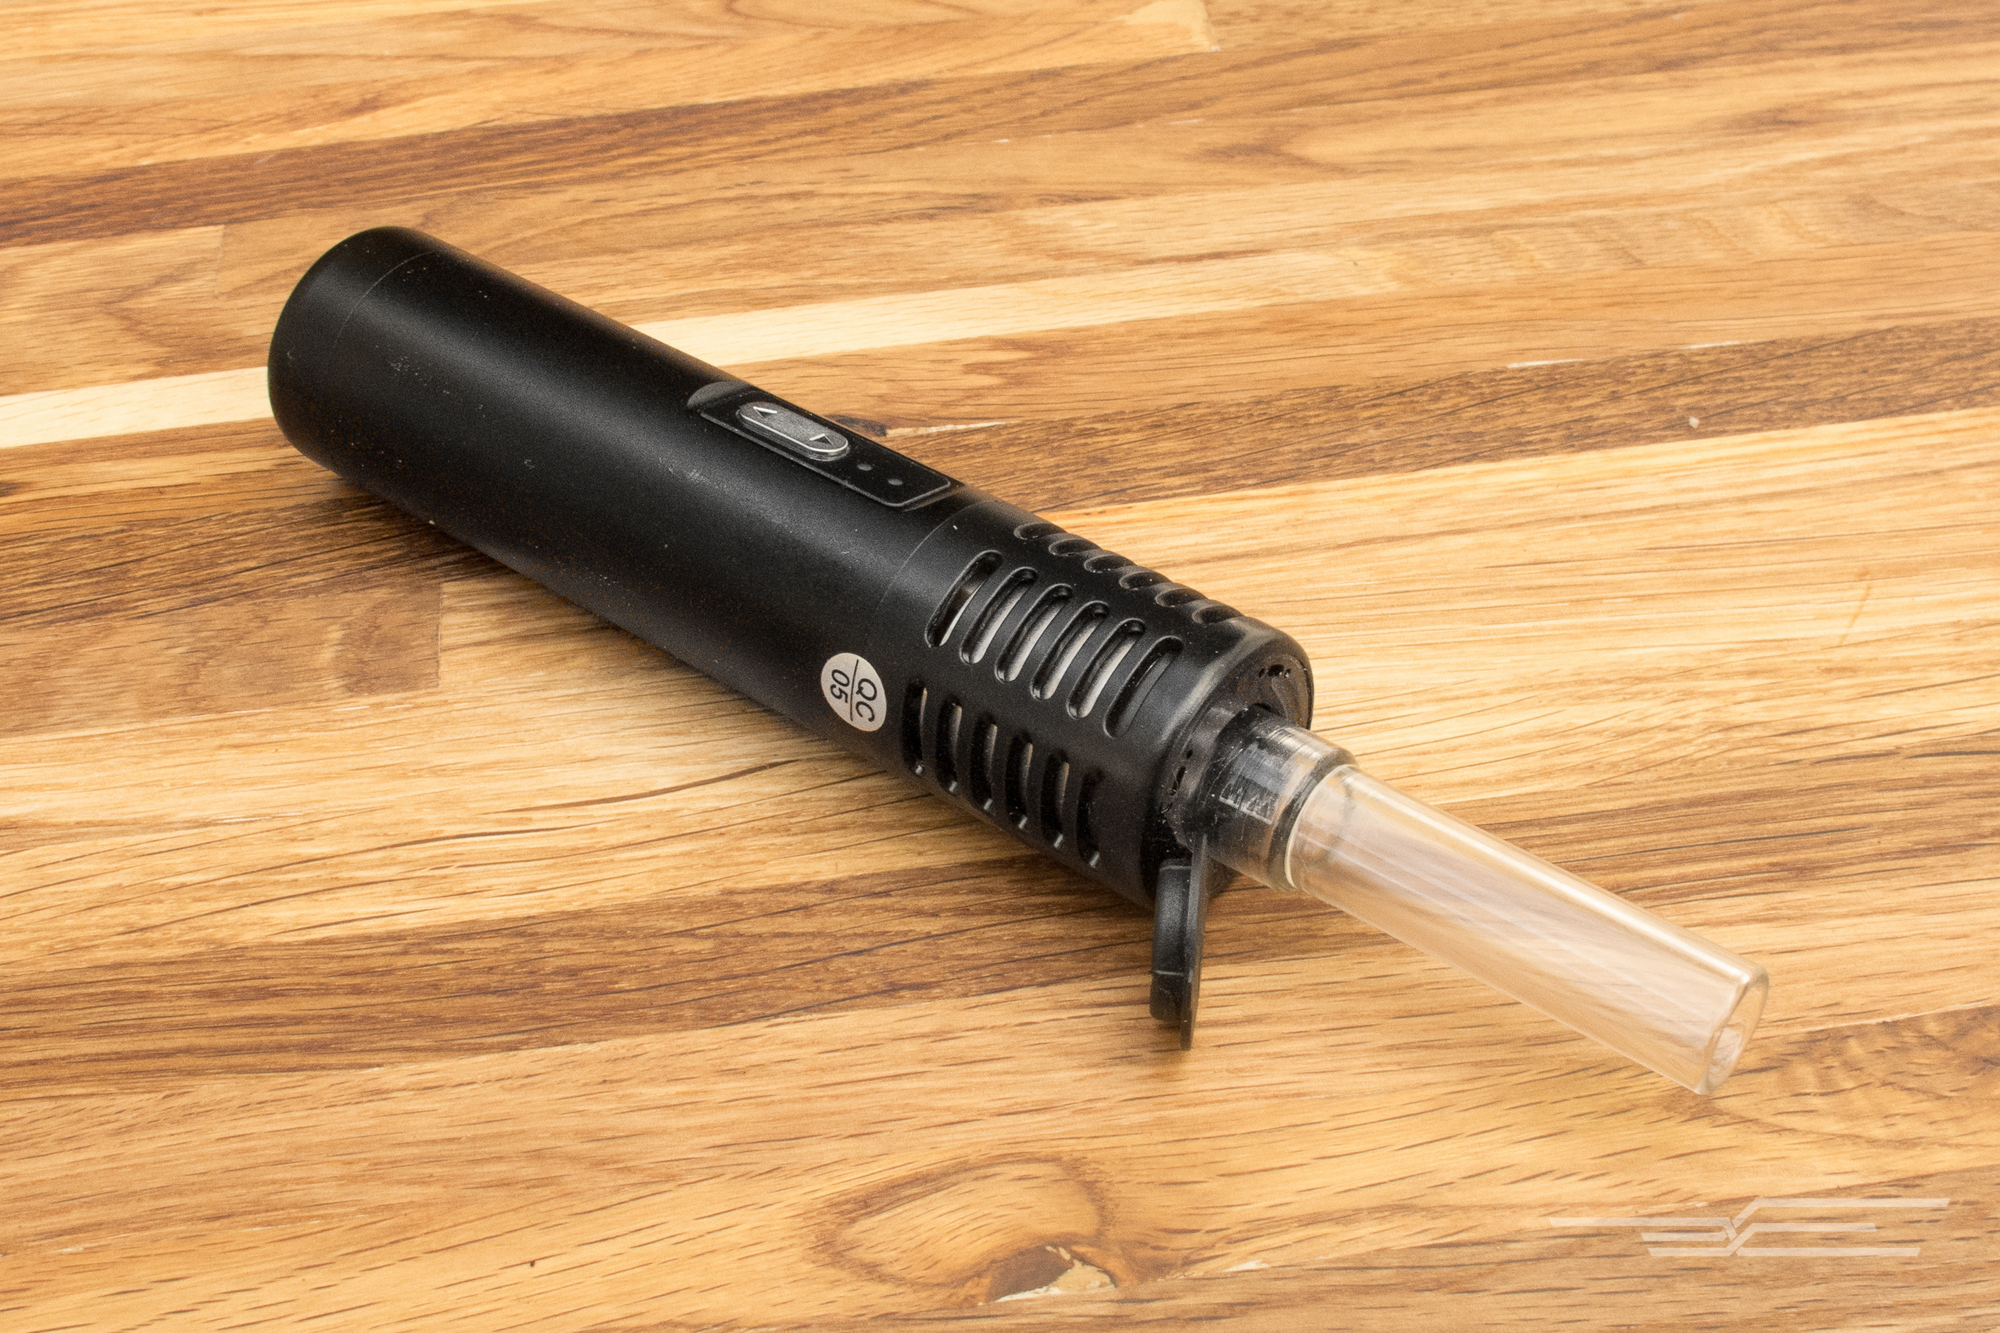 The best portable vaporizer for most people